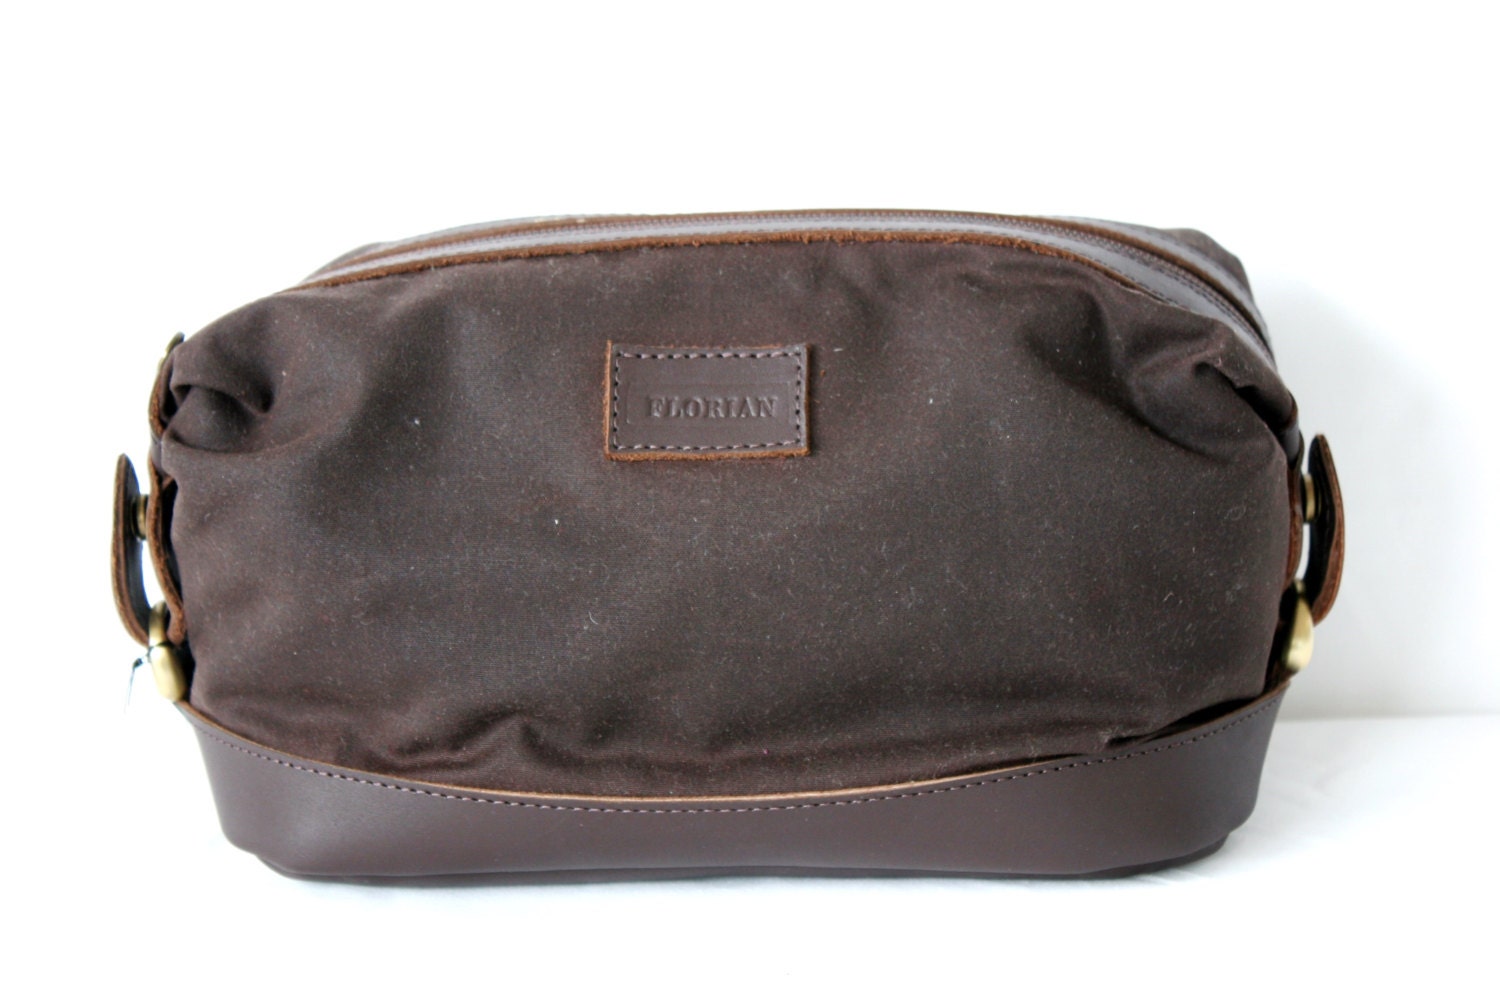 Mens Toiletry Bag Dopp Kit in Waxed Canvas and Leather